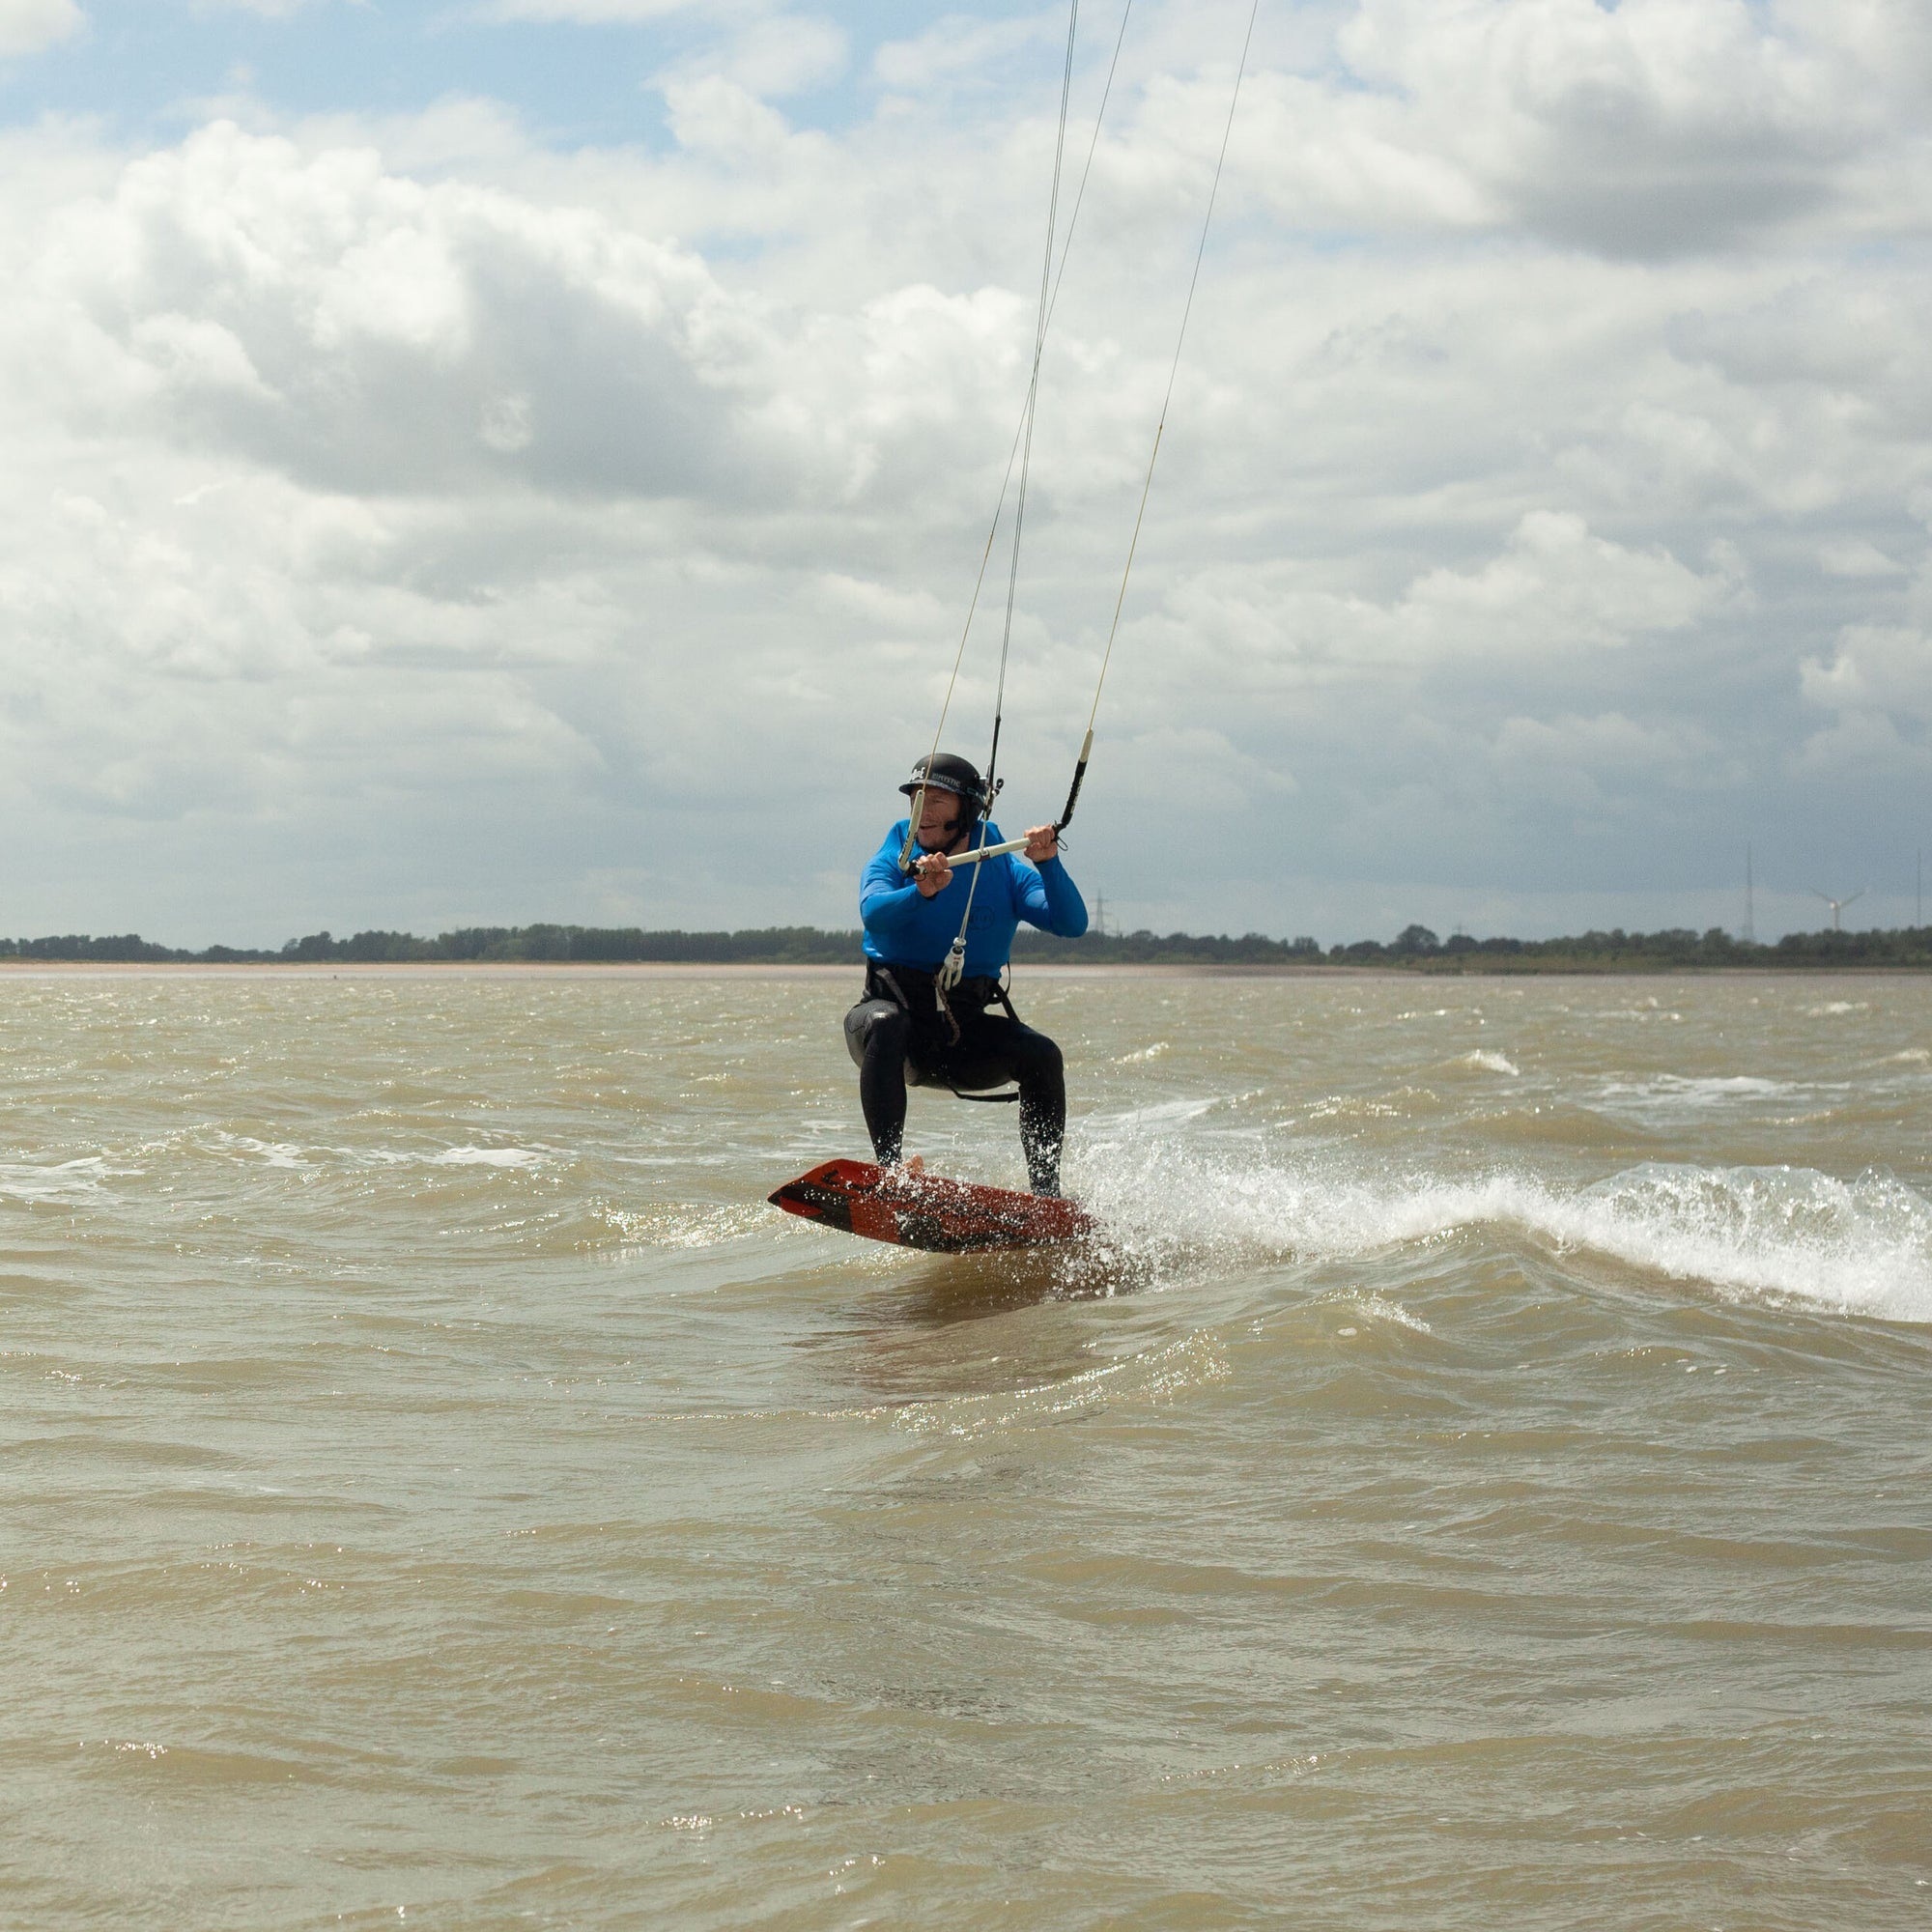 Tide Watersports private kitesurfing lesson in progress with the student using a bb talking bluetooth headset to talk to the instructor so that they get direct feedback when learning. the student it riding cleanly upwind and having lots of fun.